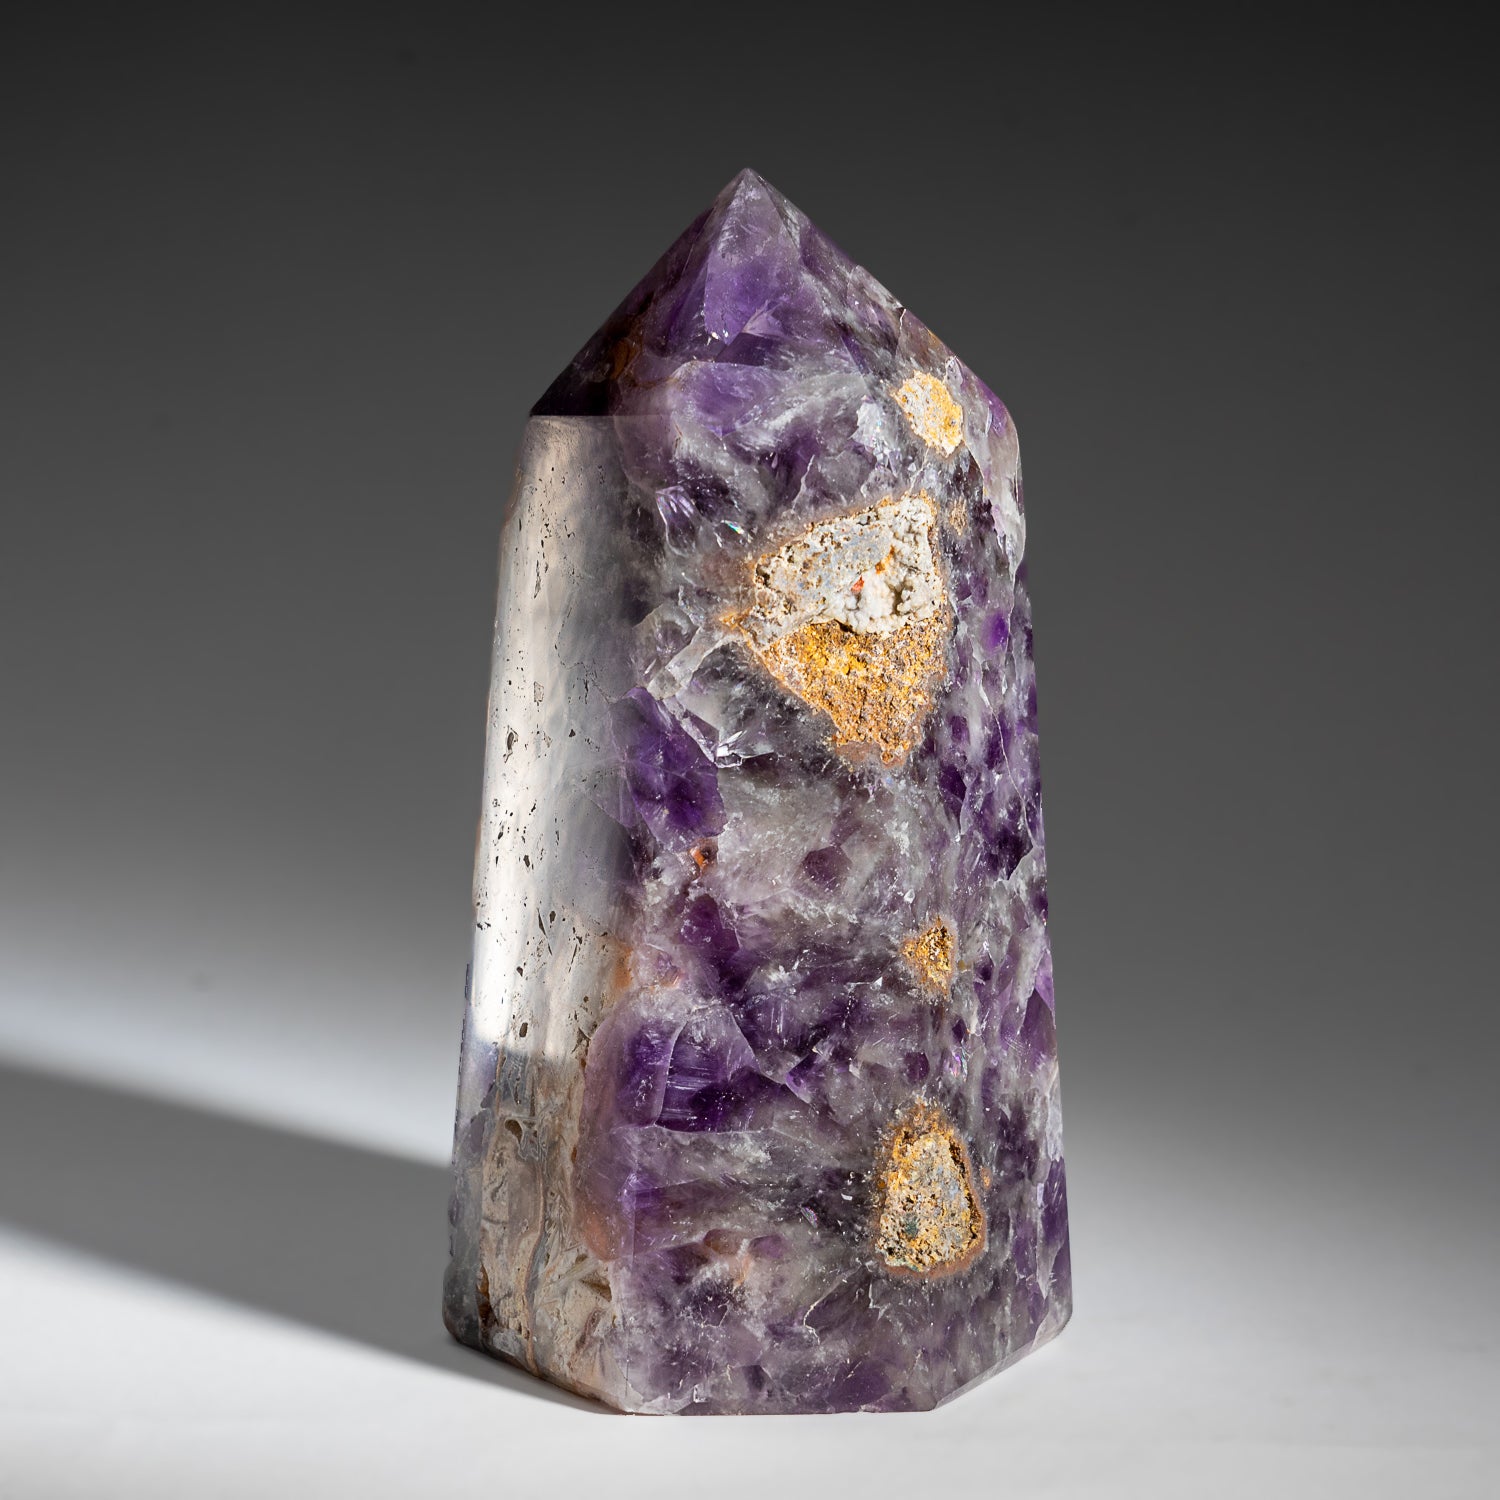 Polished Amethyst Crystal Point From Brazil (2.6 lbs)